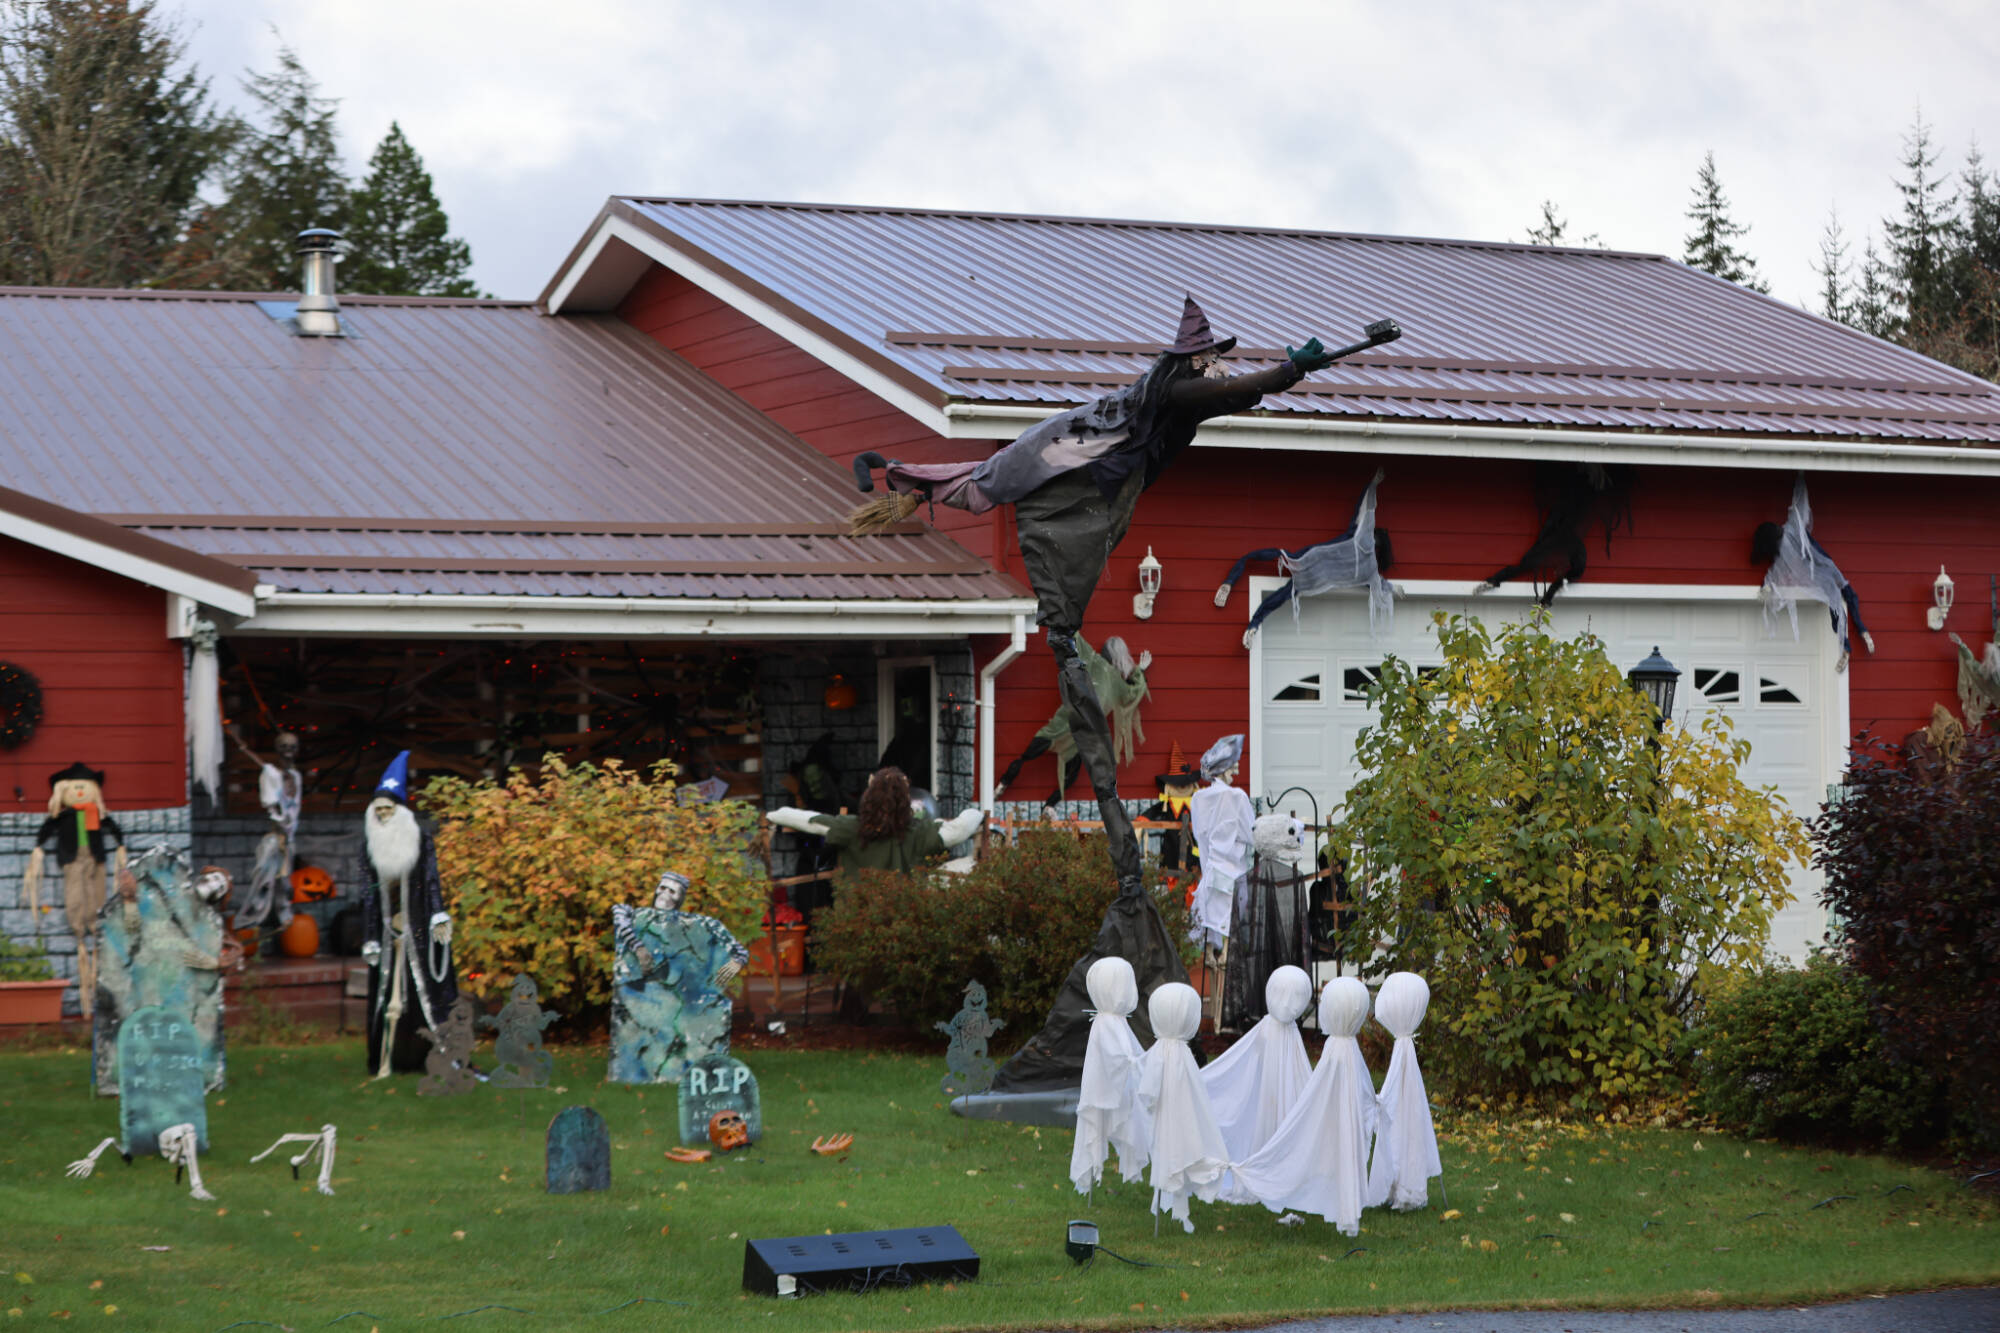 Jonson Kuhn / Juneau Empire
Earl’s Haunted Garage is located at 9420 Berners Ave. and will officially be open to the public on Saturday, Sunday, and Monday, Oct. 29, 30, and 31 from 6-11 p.m. $2 or canned goods are accepted for admission and all of the donations and proceeds go to various local food pantries.